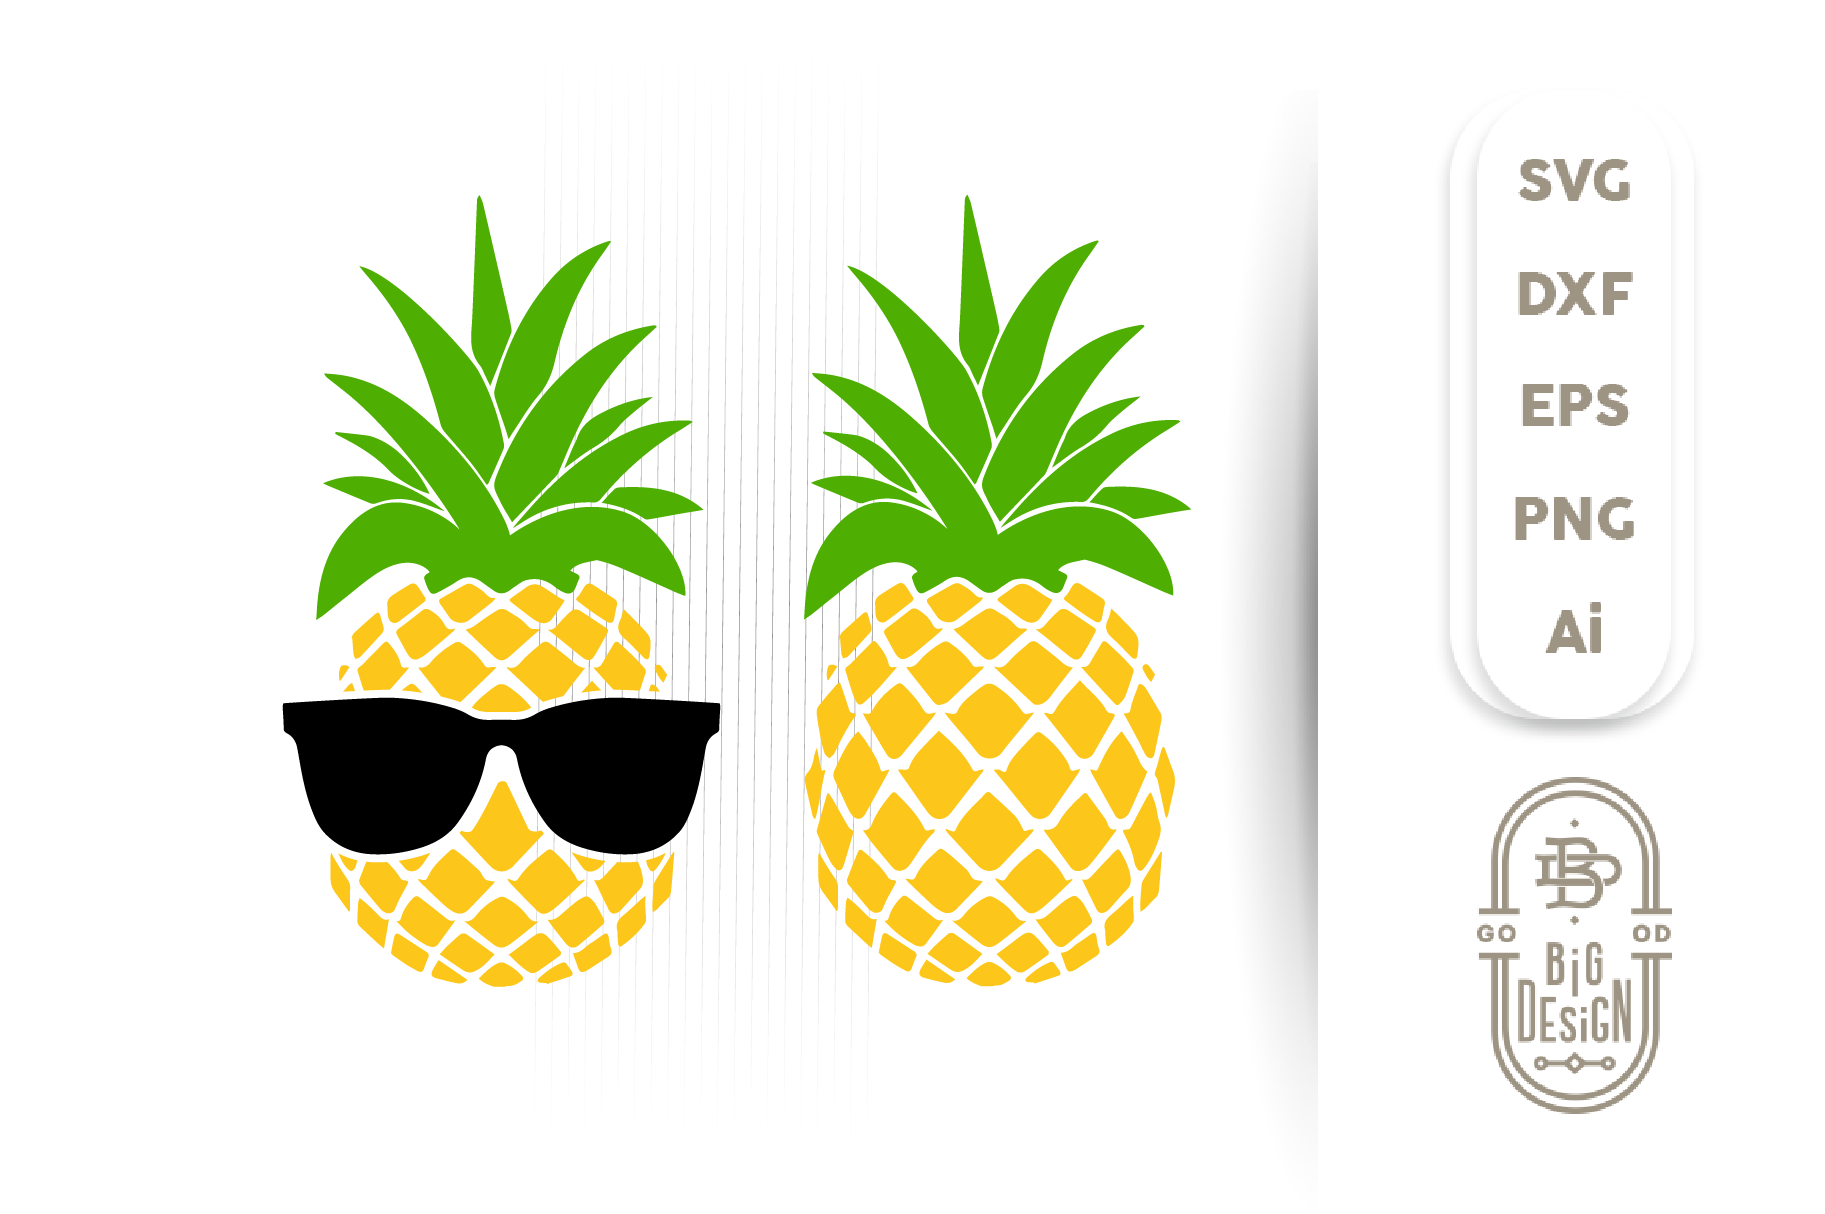 Download Pineapple Svg Pineapple With Sunglasses Svg Pineapple Clipart Design Shopy SVG, PNG, EPS, DXF File